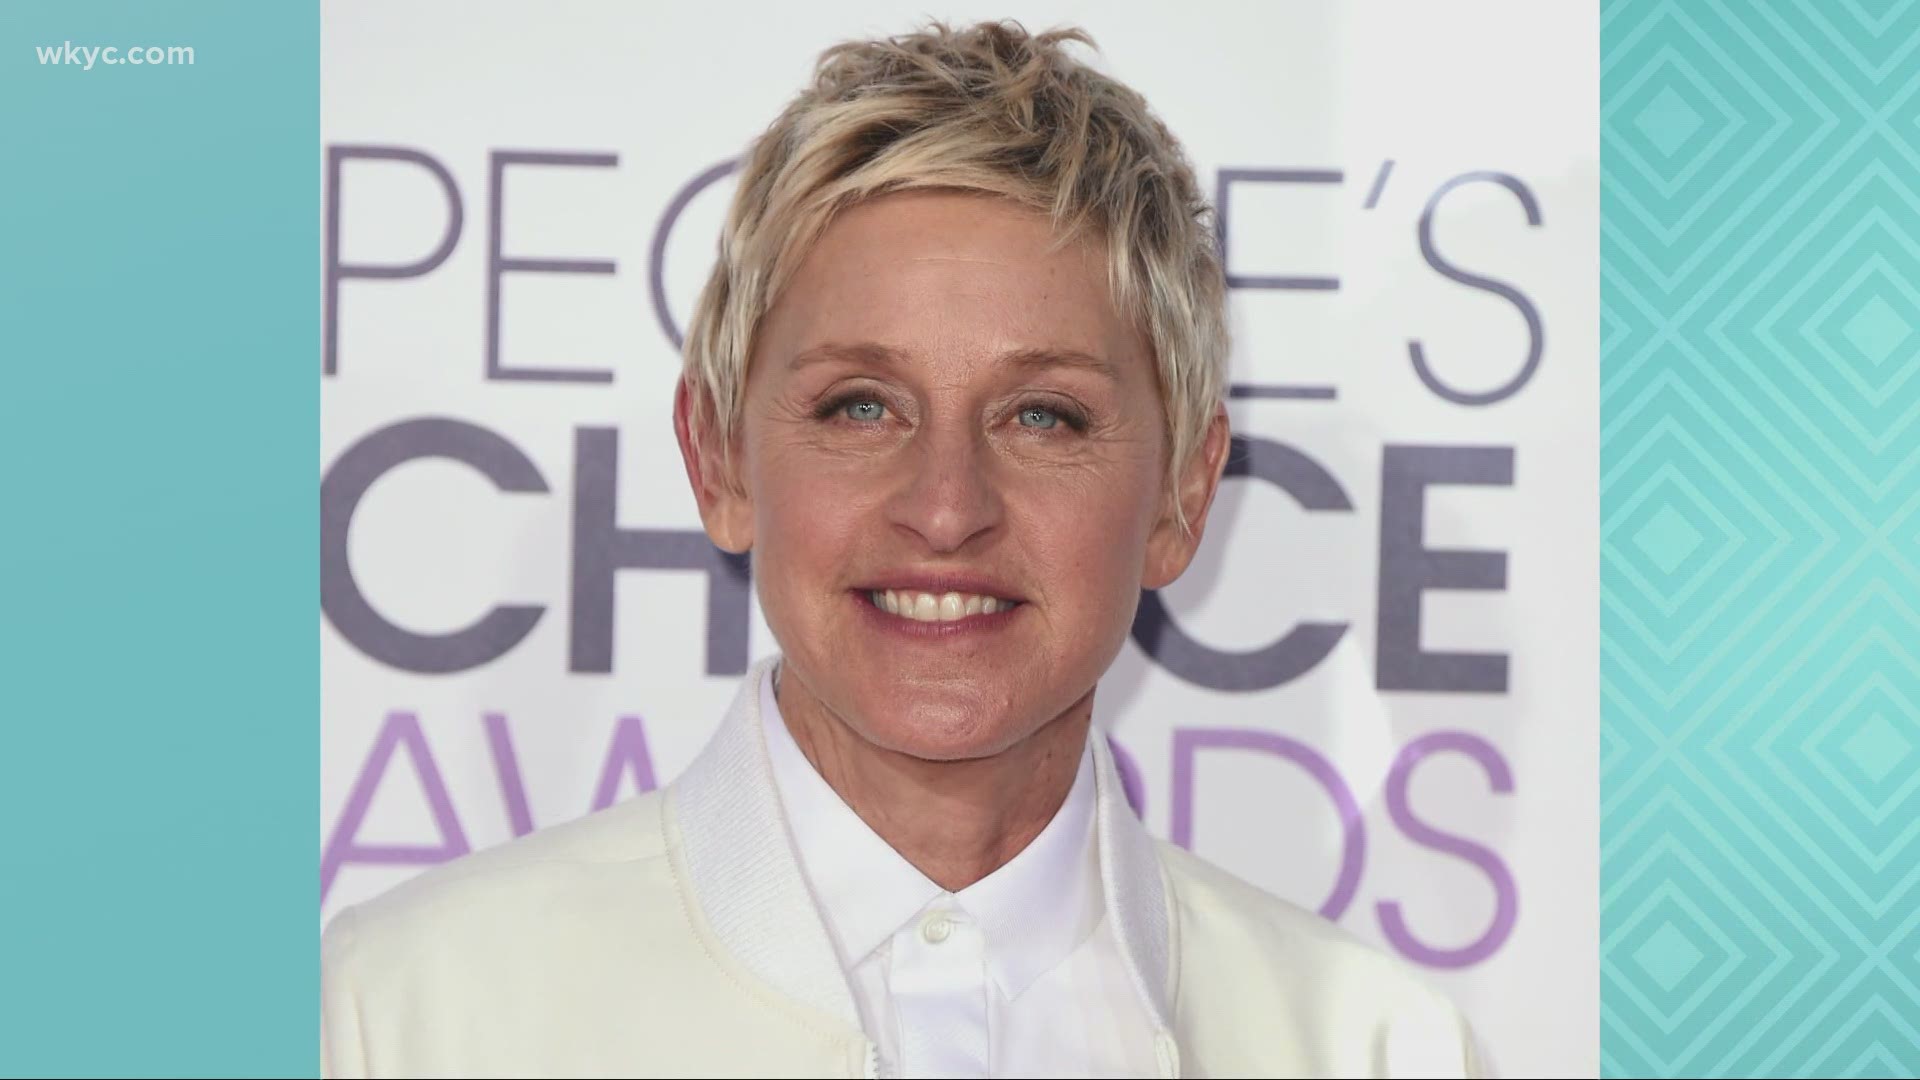 Daytime talk show host Ellen DeGeneres will end her highly successful show in 2022. She informed her staff of her decision on May 11th.